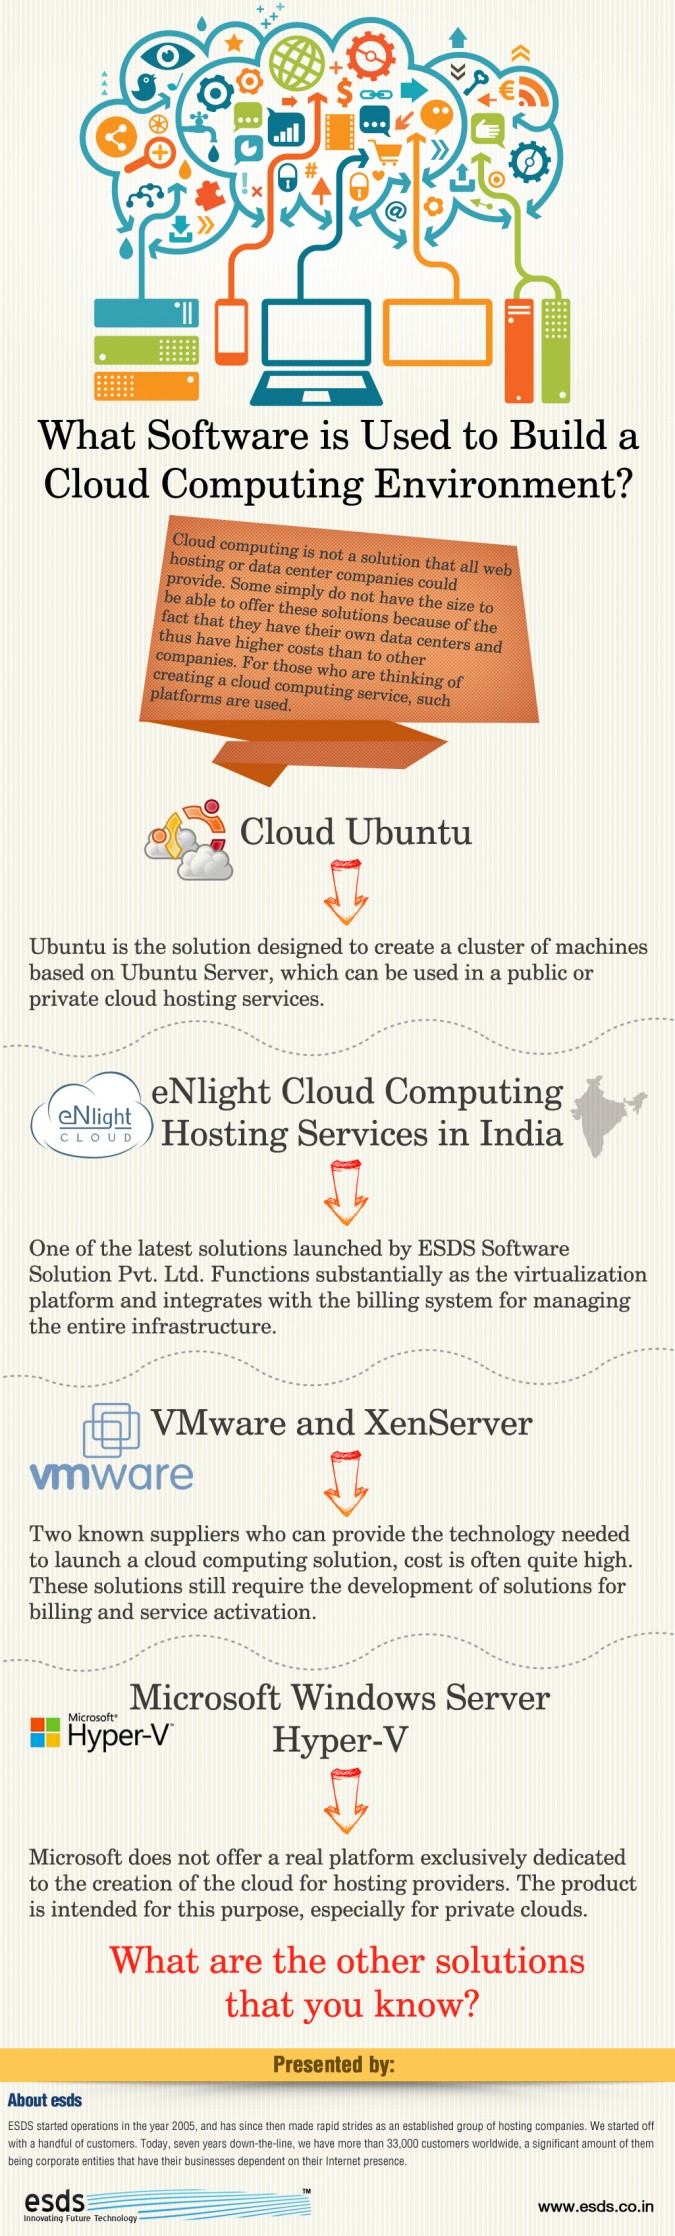 What-Software-is-Used-to-Build-a-Cloud-Computing-Environment